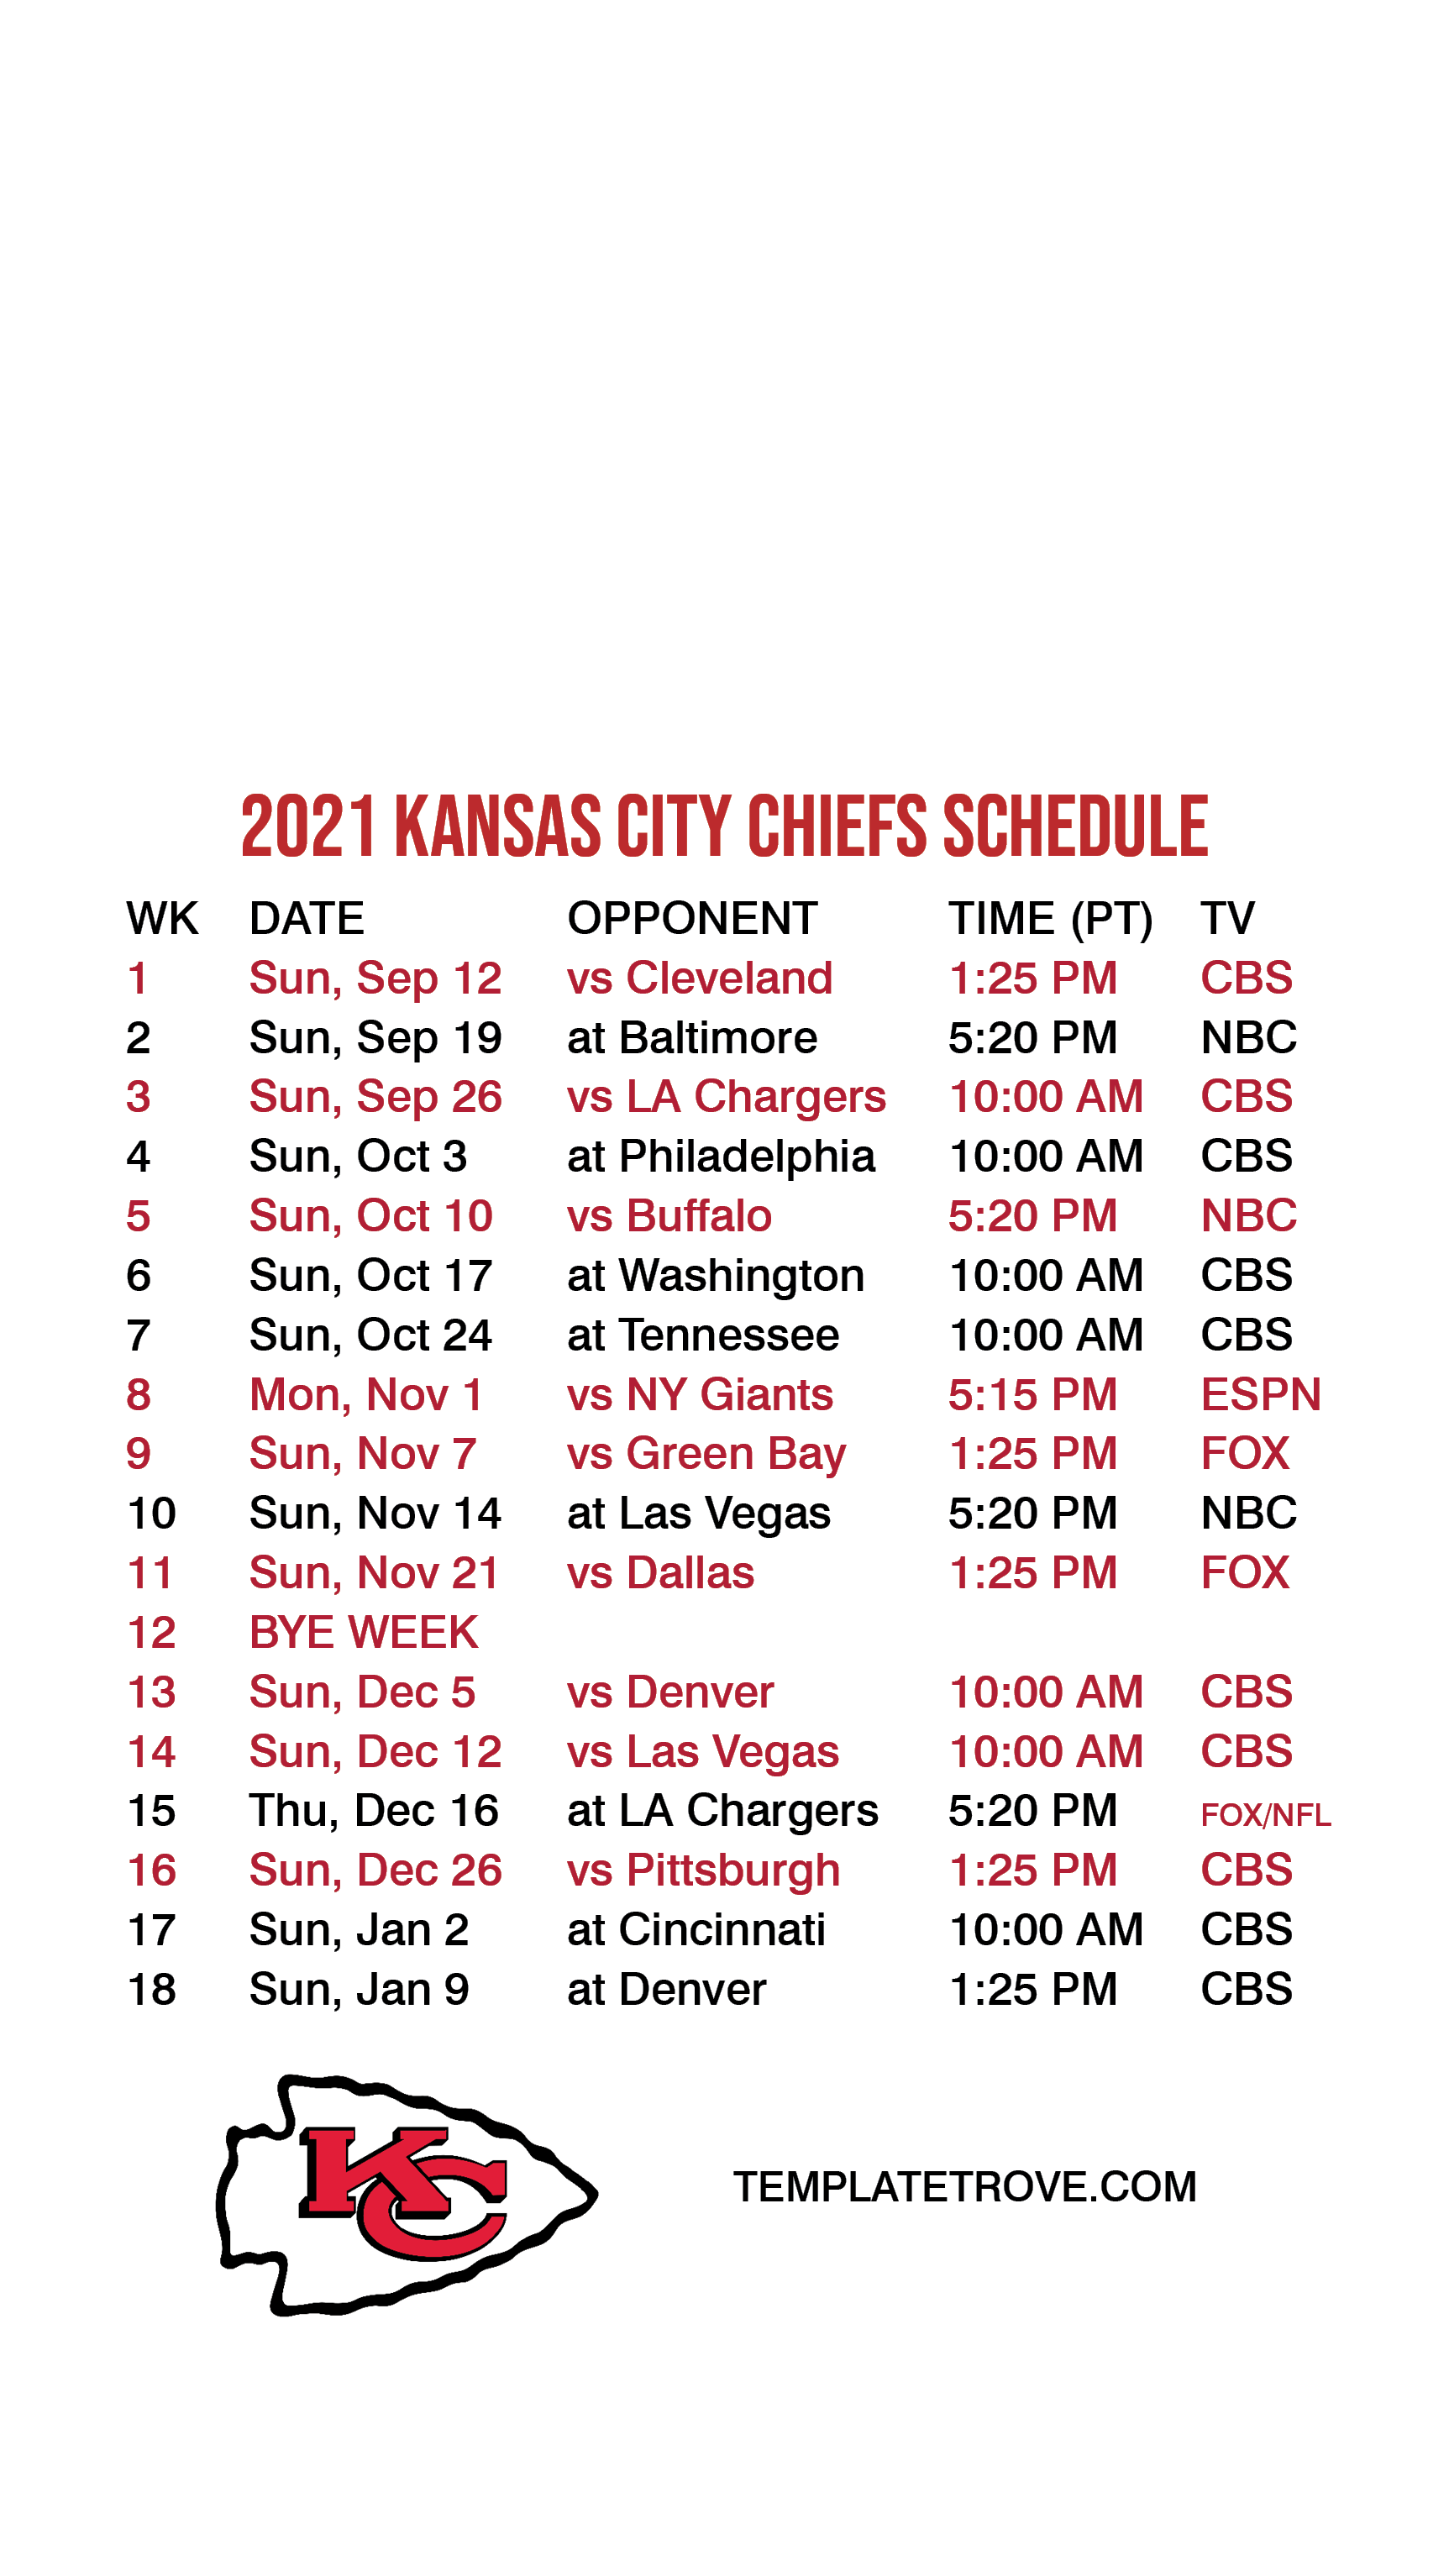 nfl schedule 2022 jonizain here are some of the best nfl teams